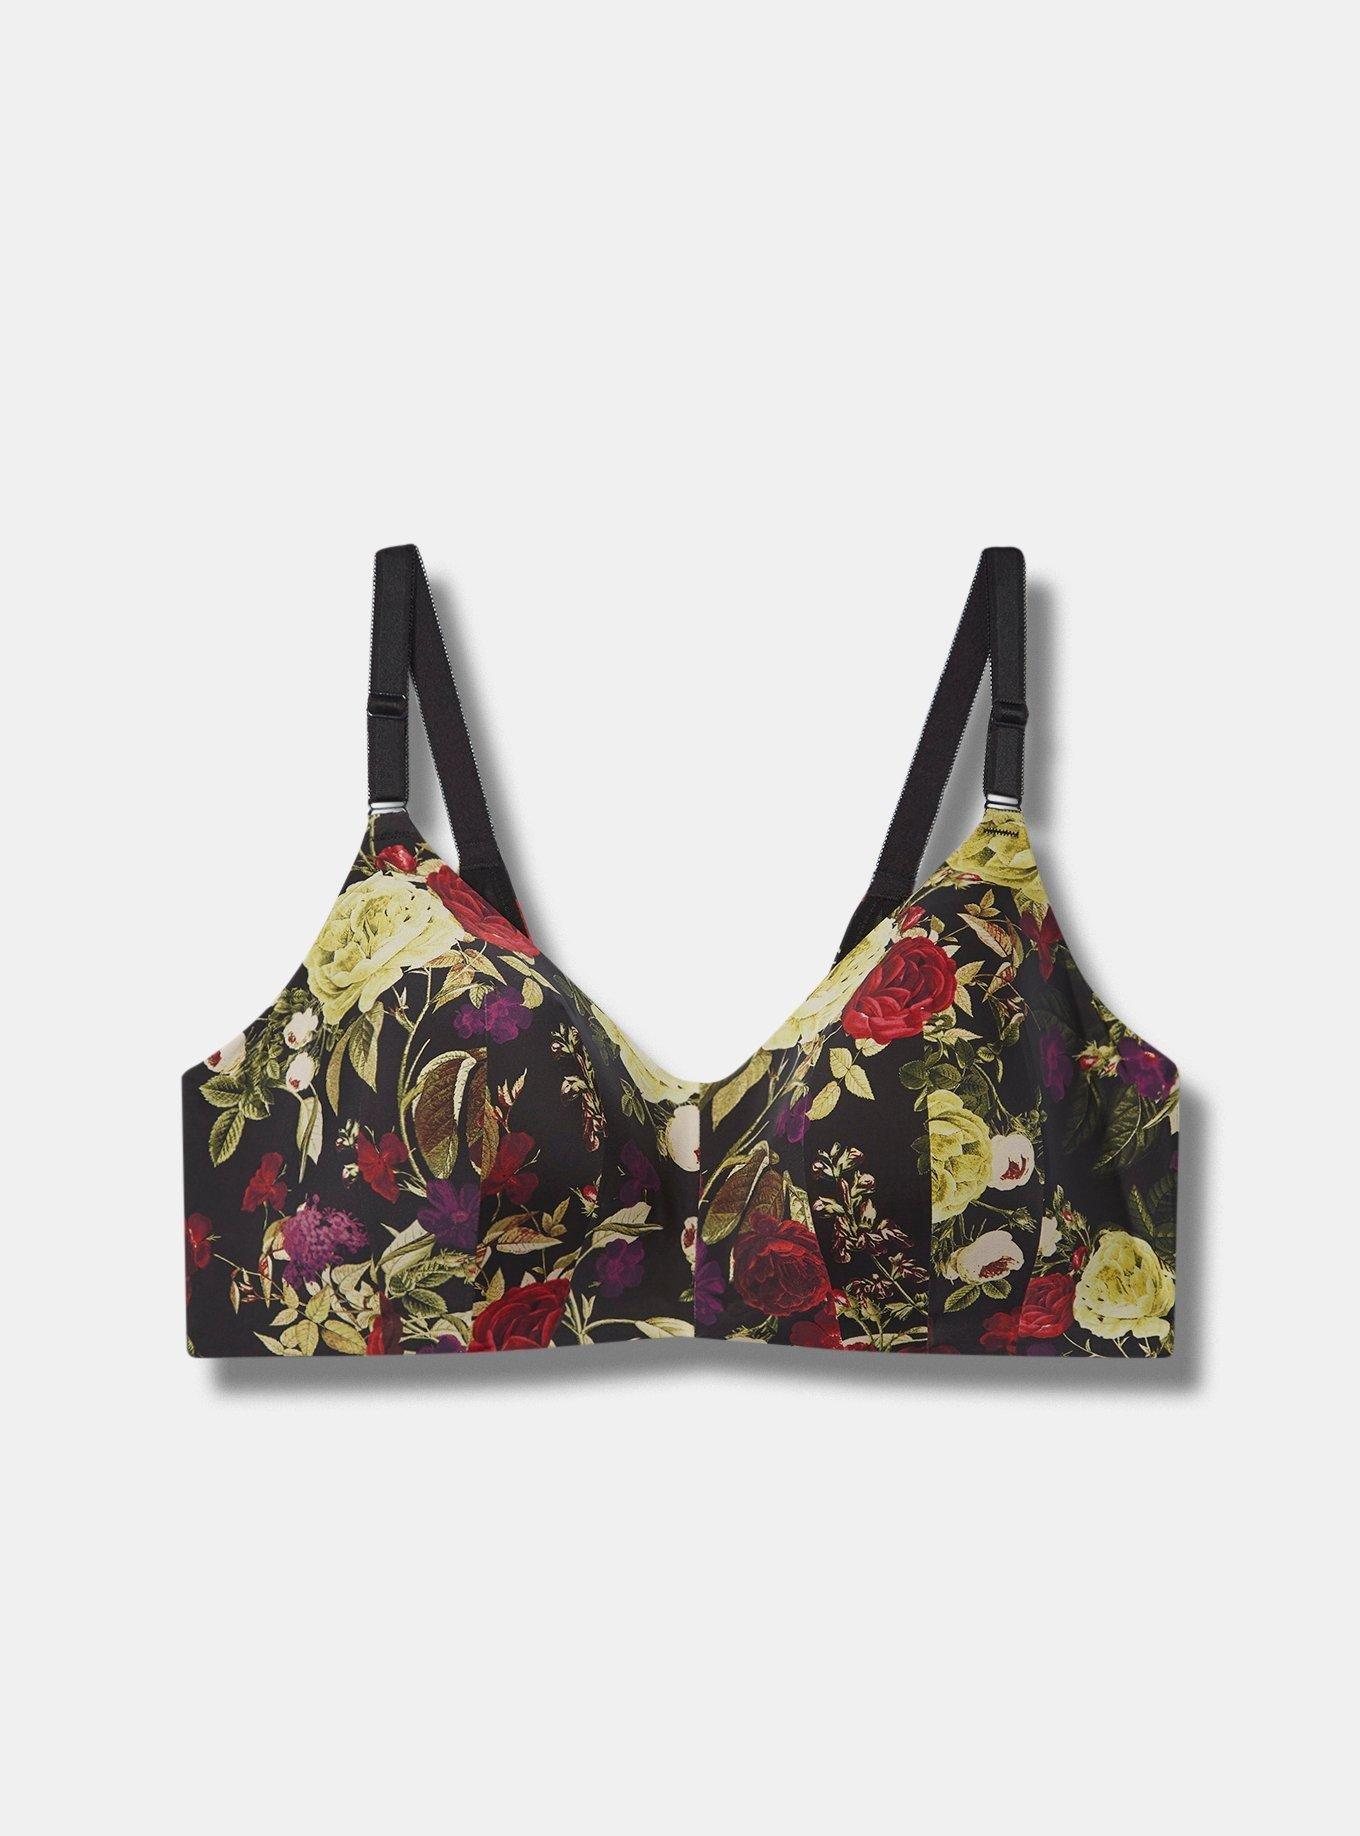 Torrid bras - message about pricing (1- $35